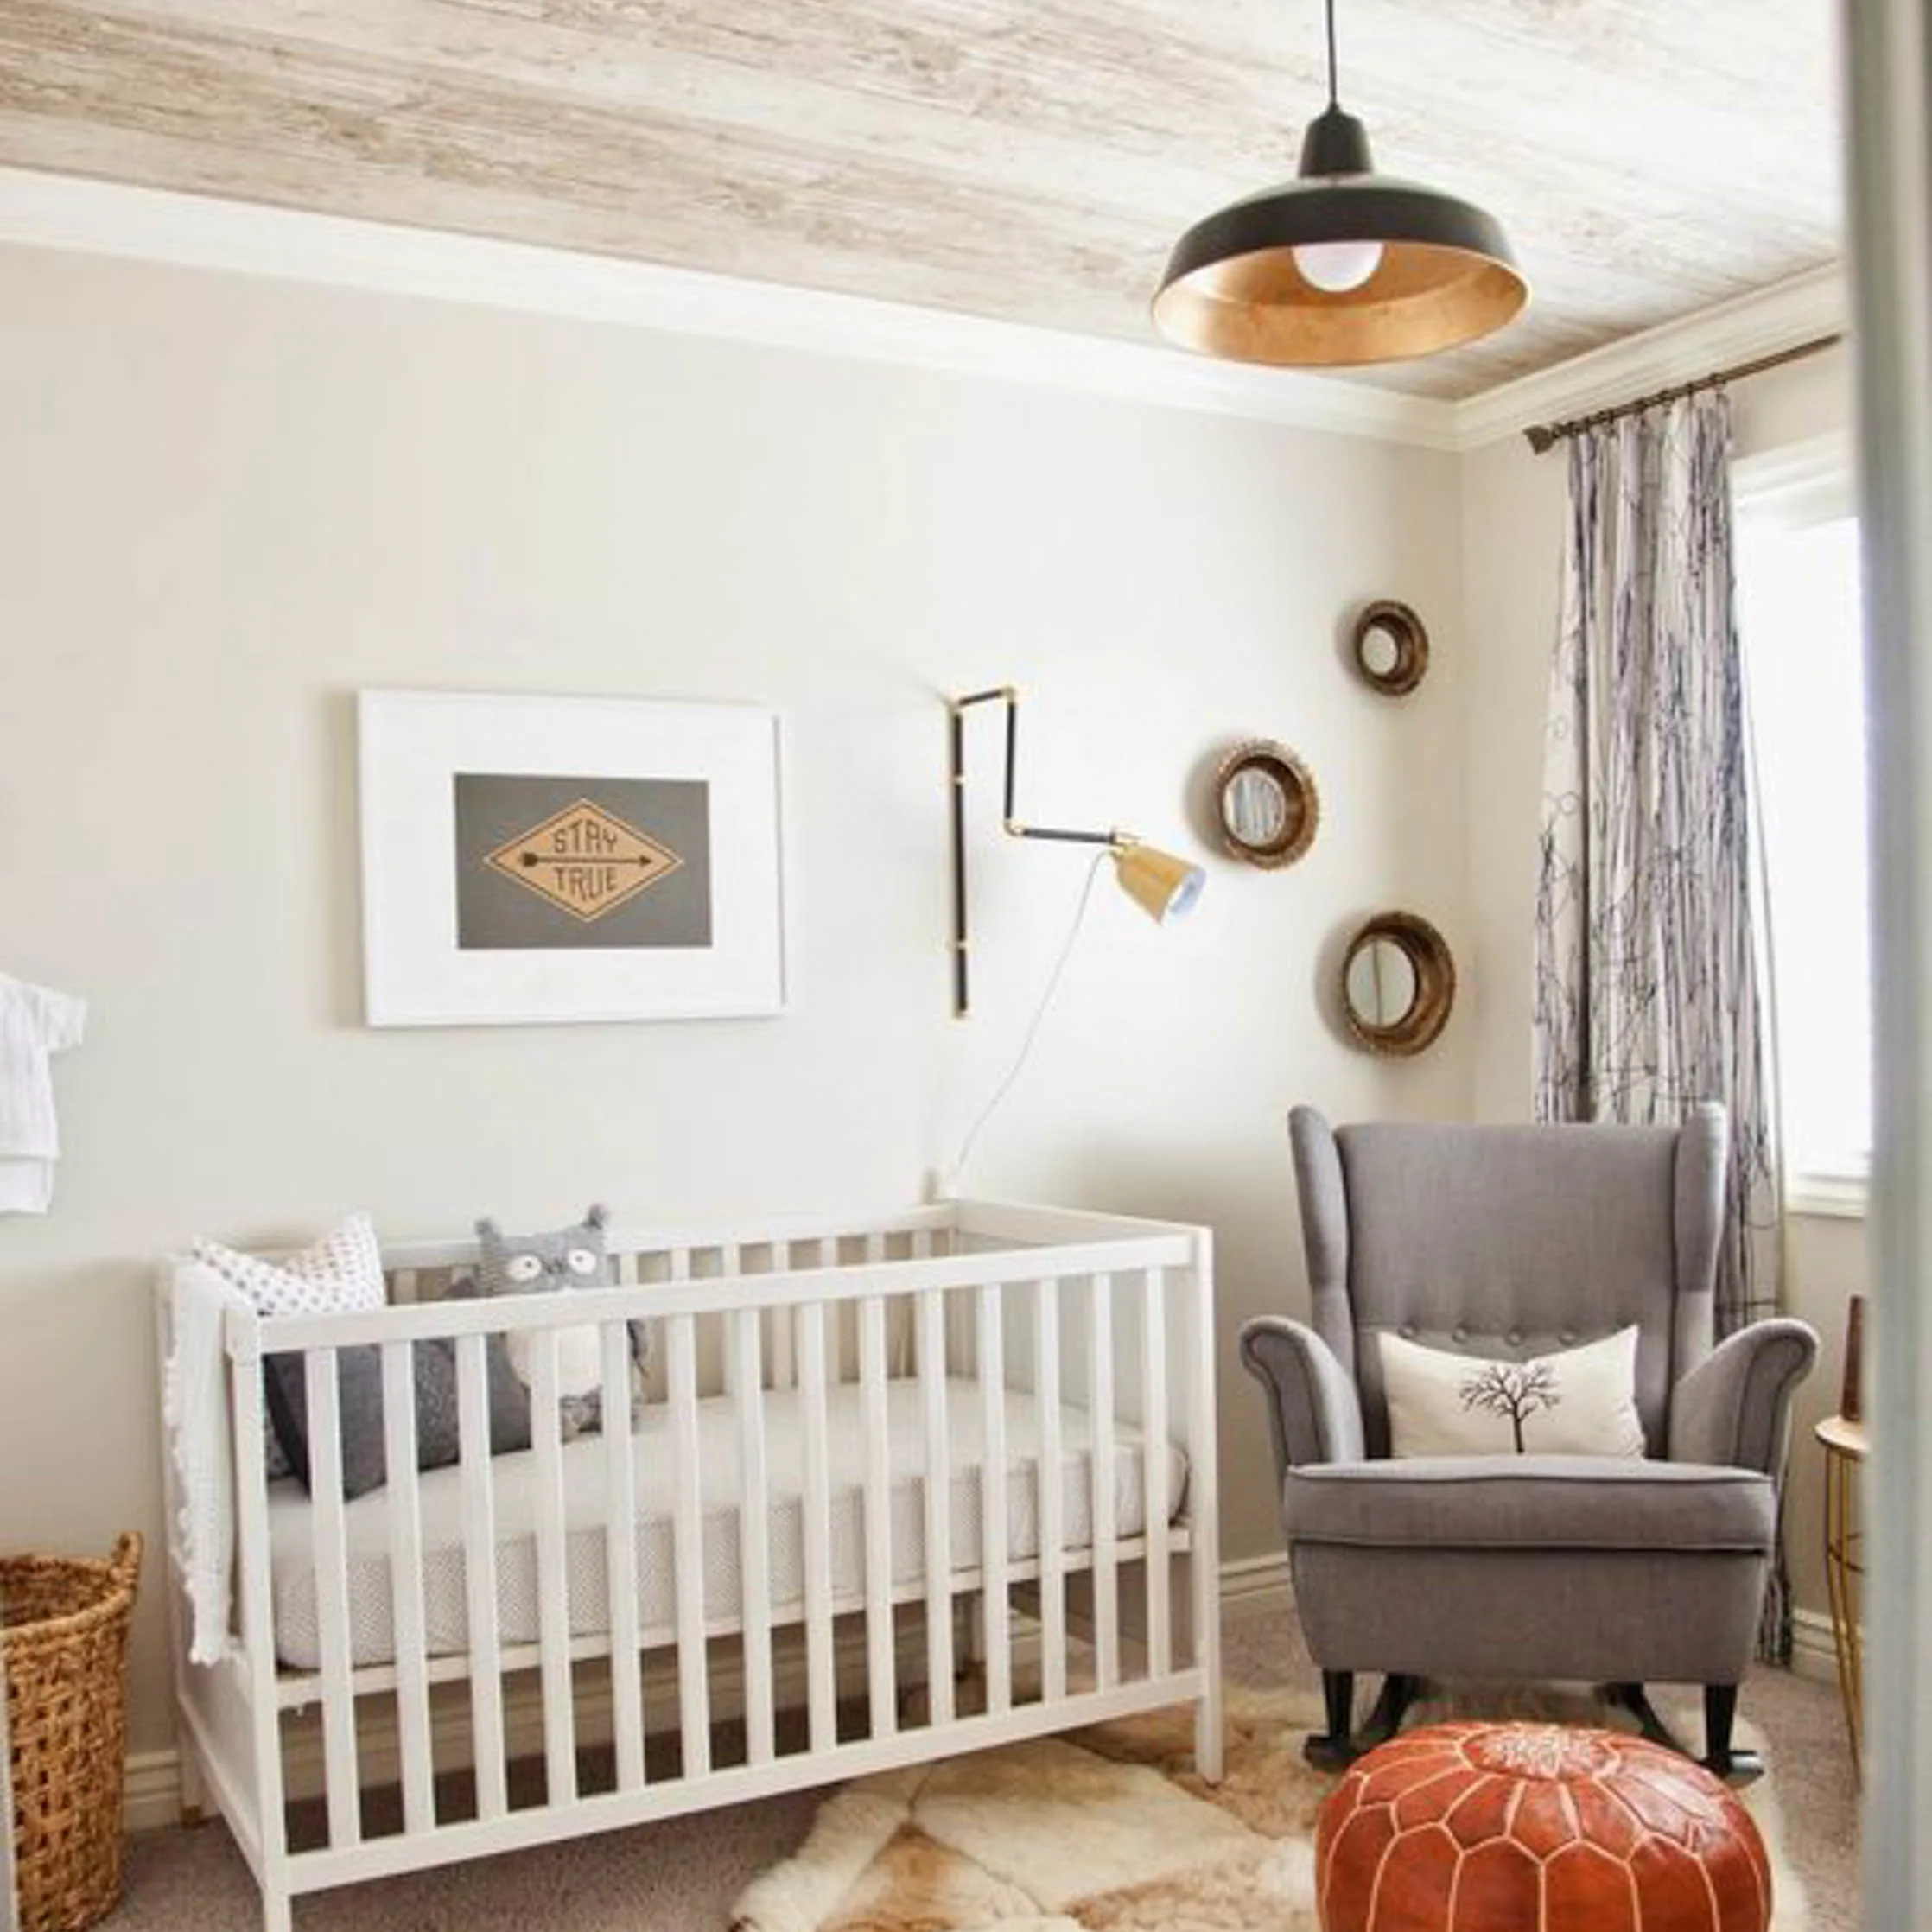 Pinterest Making Use of the Fifth Wall in a Nursery